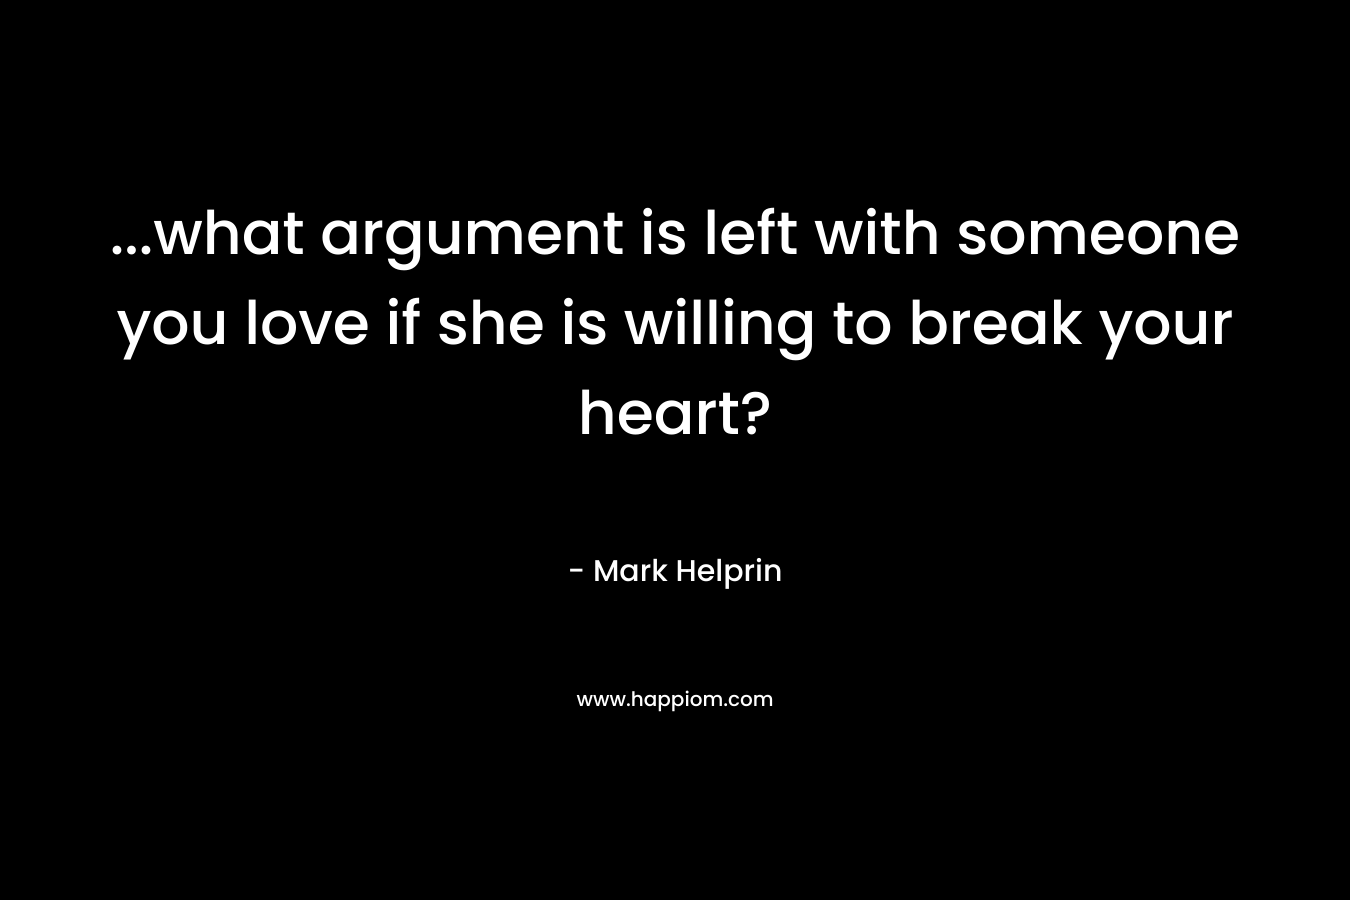 …what argument is left with someone you love if she is willing to break your heart? – Mark Helprin